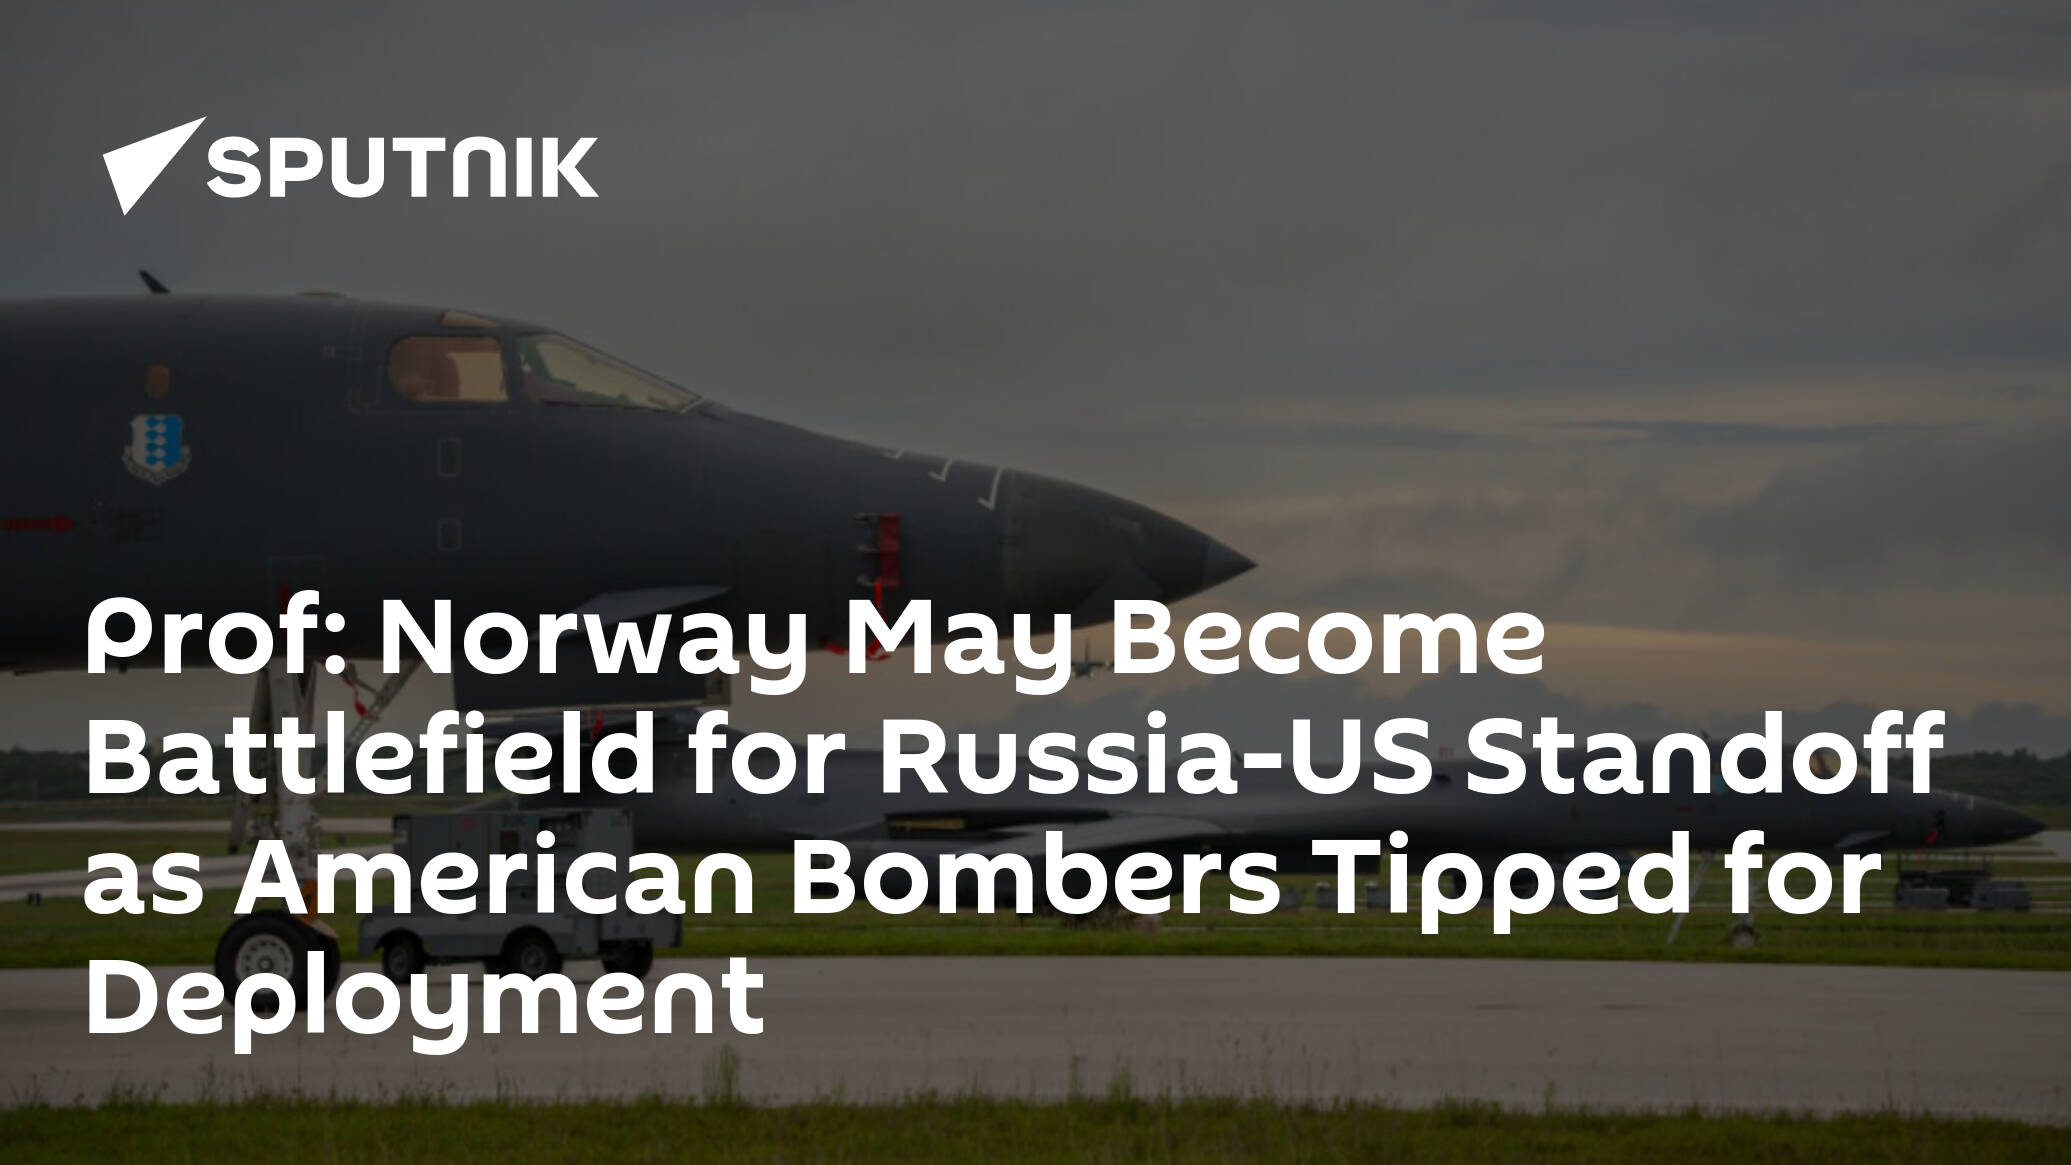 Prof: Norway May Become Battlefield for Russia-US Standoff as American Bombers Tipped for Deployment